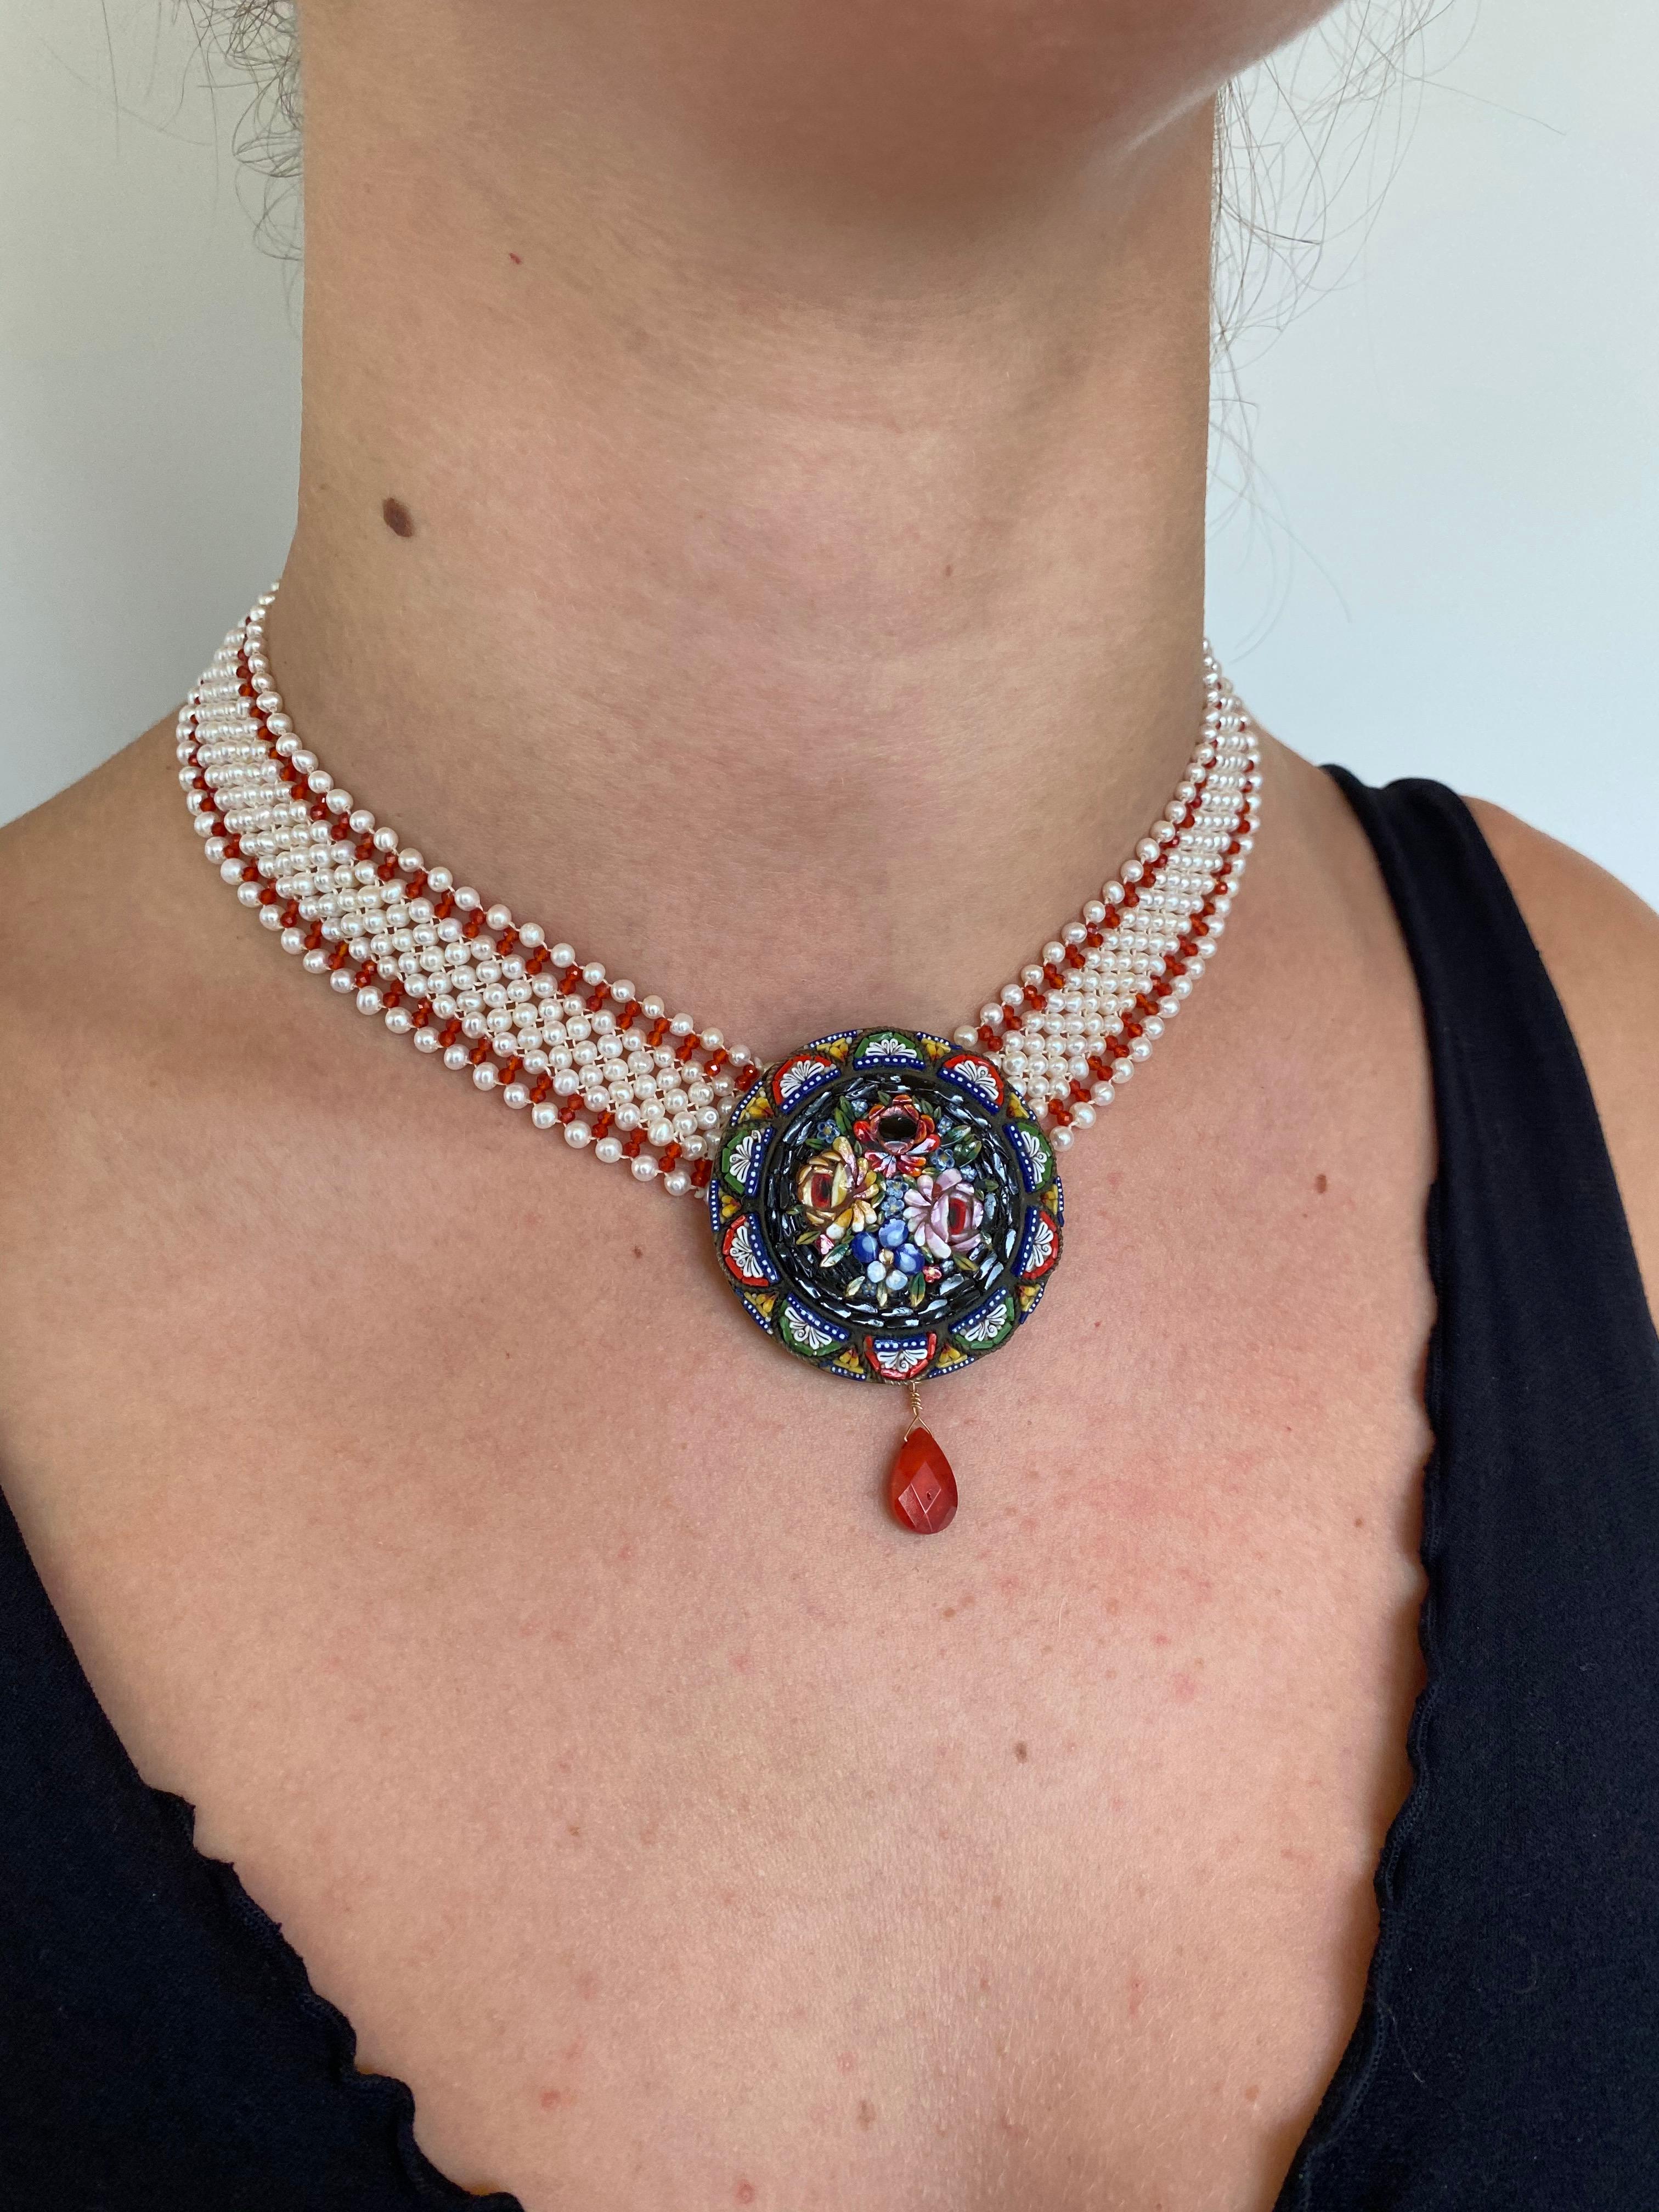 Gorgeous hand woven Pearl necklace by Marina J. This necklace is made with a slight graduation of Pearls which allows necklace to sit perfectly on the neck. High luster cream Pearls and radiant faceted Carnelian accent and line the beautiful lace